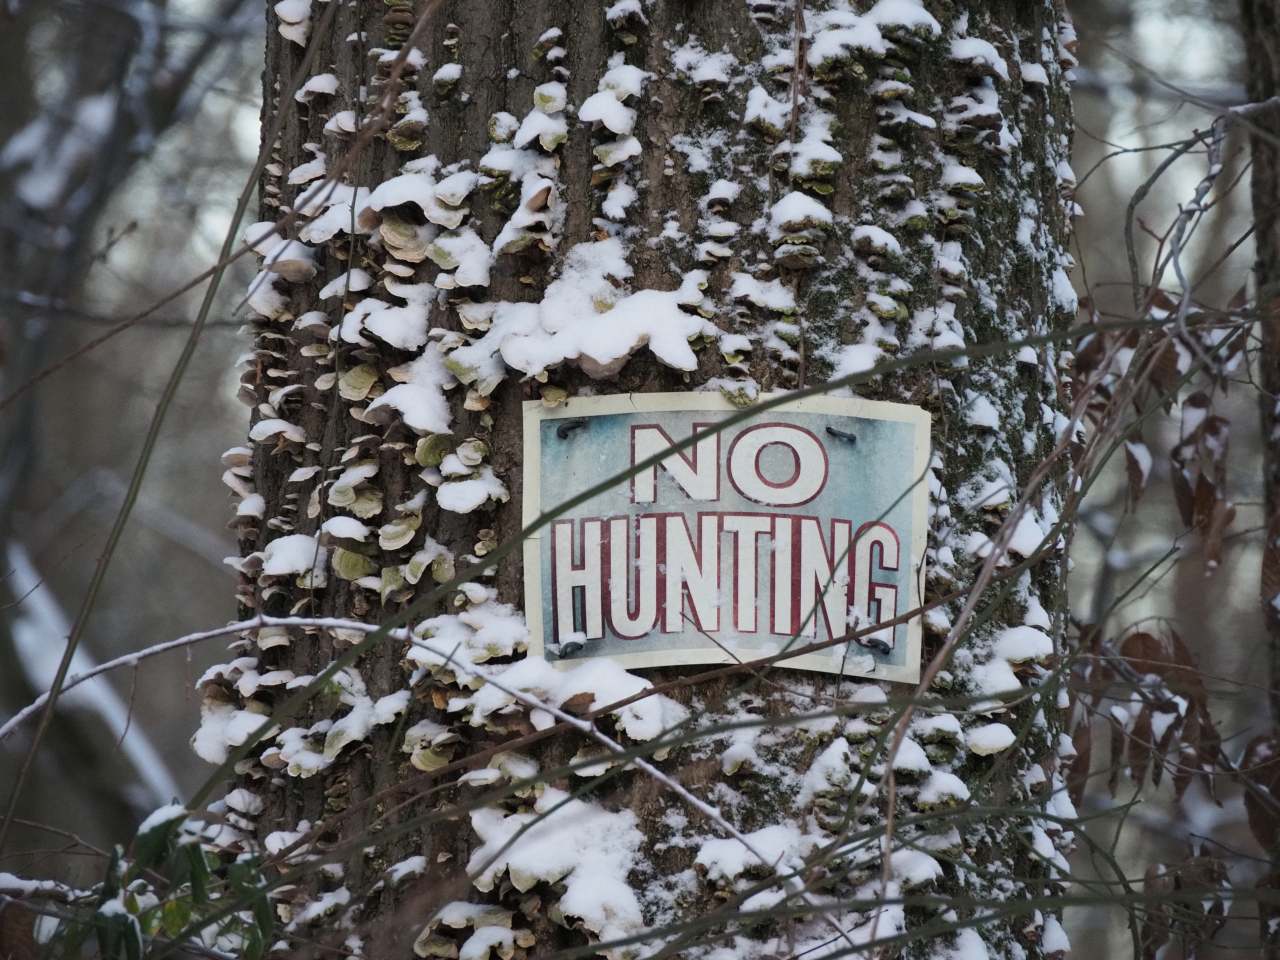 No hunting sign on mushroomed tree, now snowy.